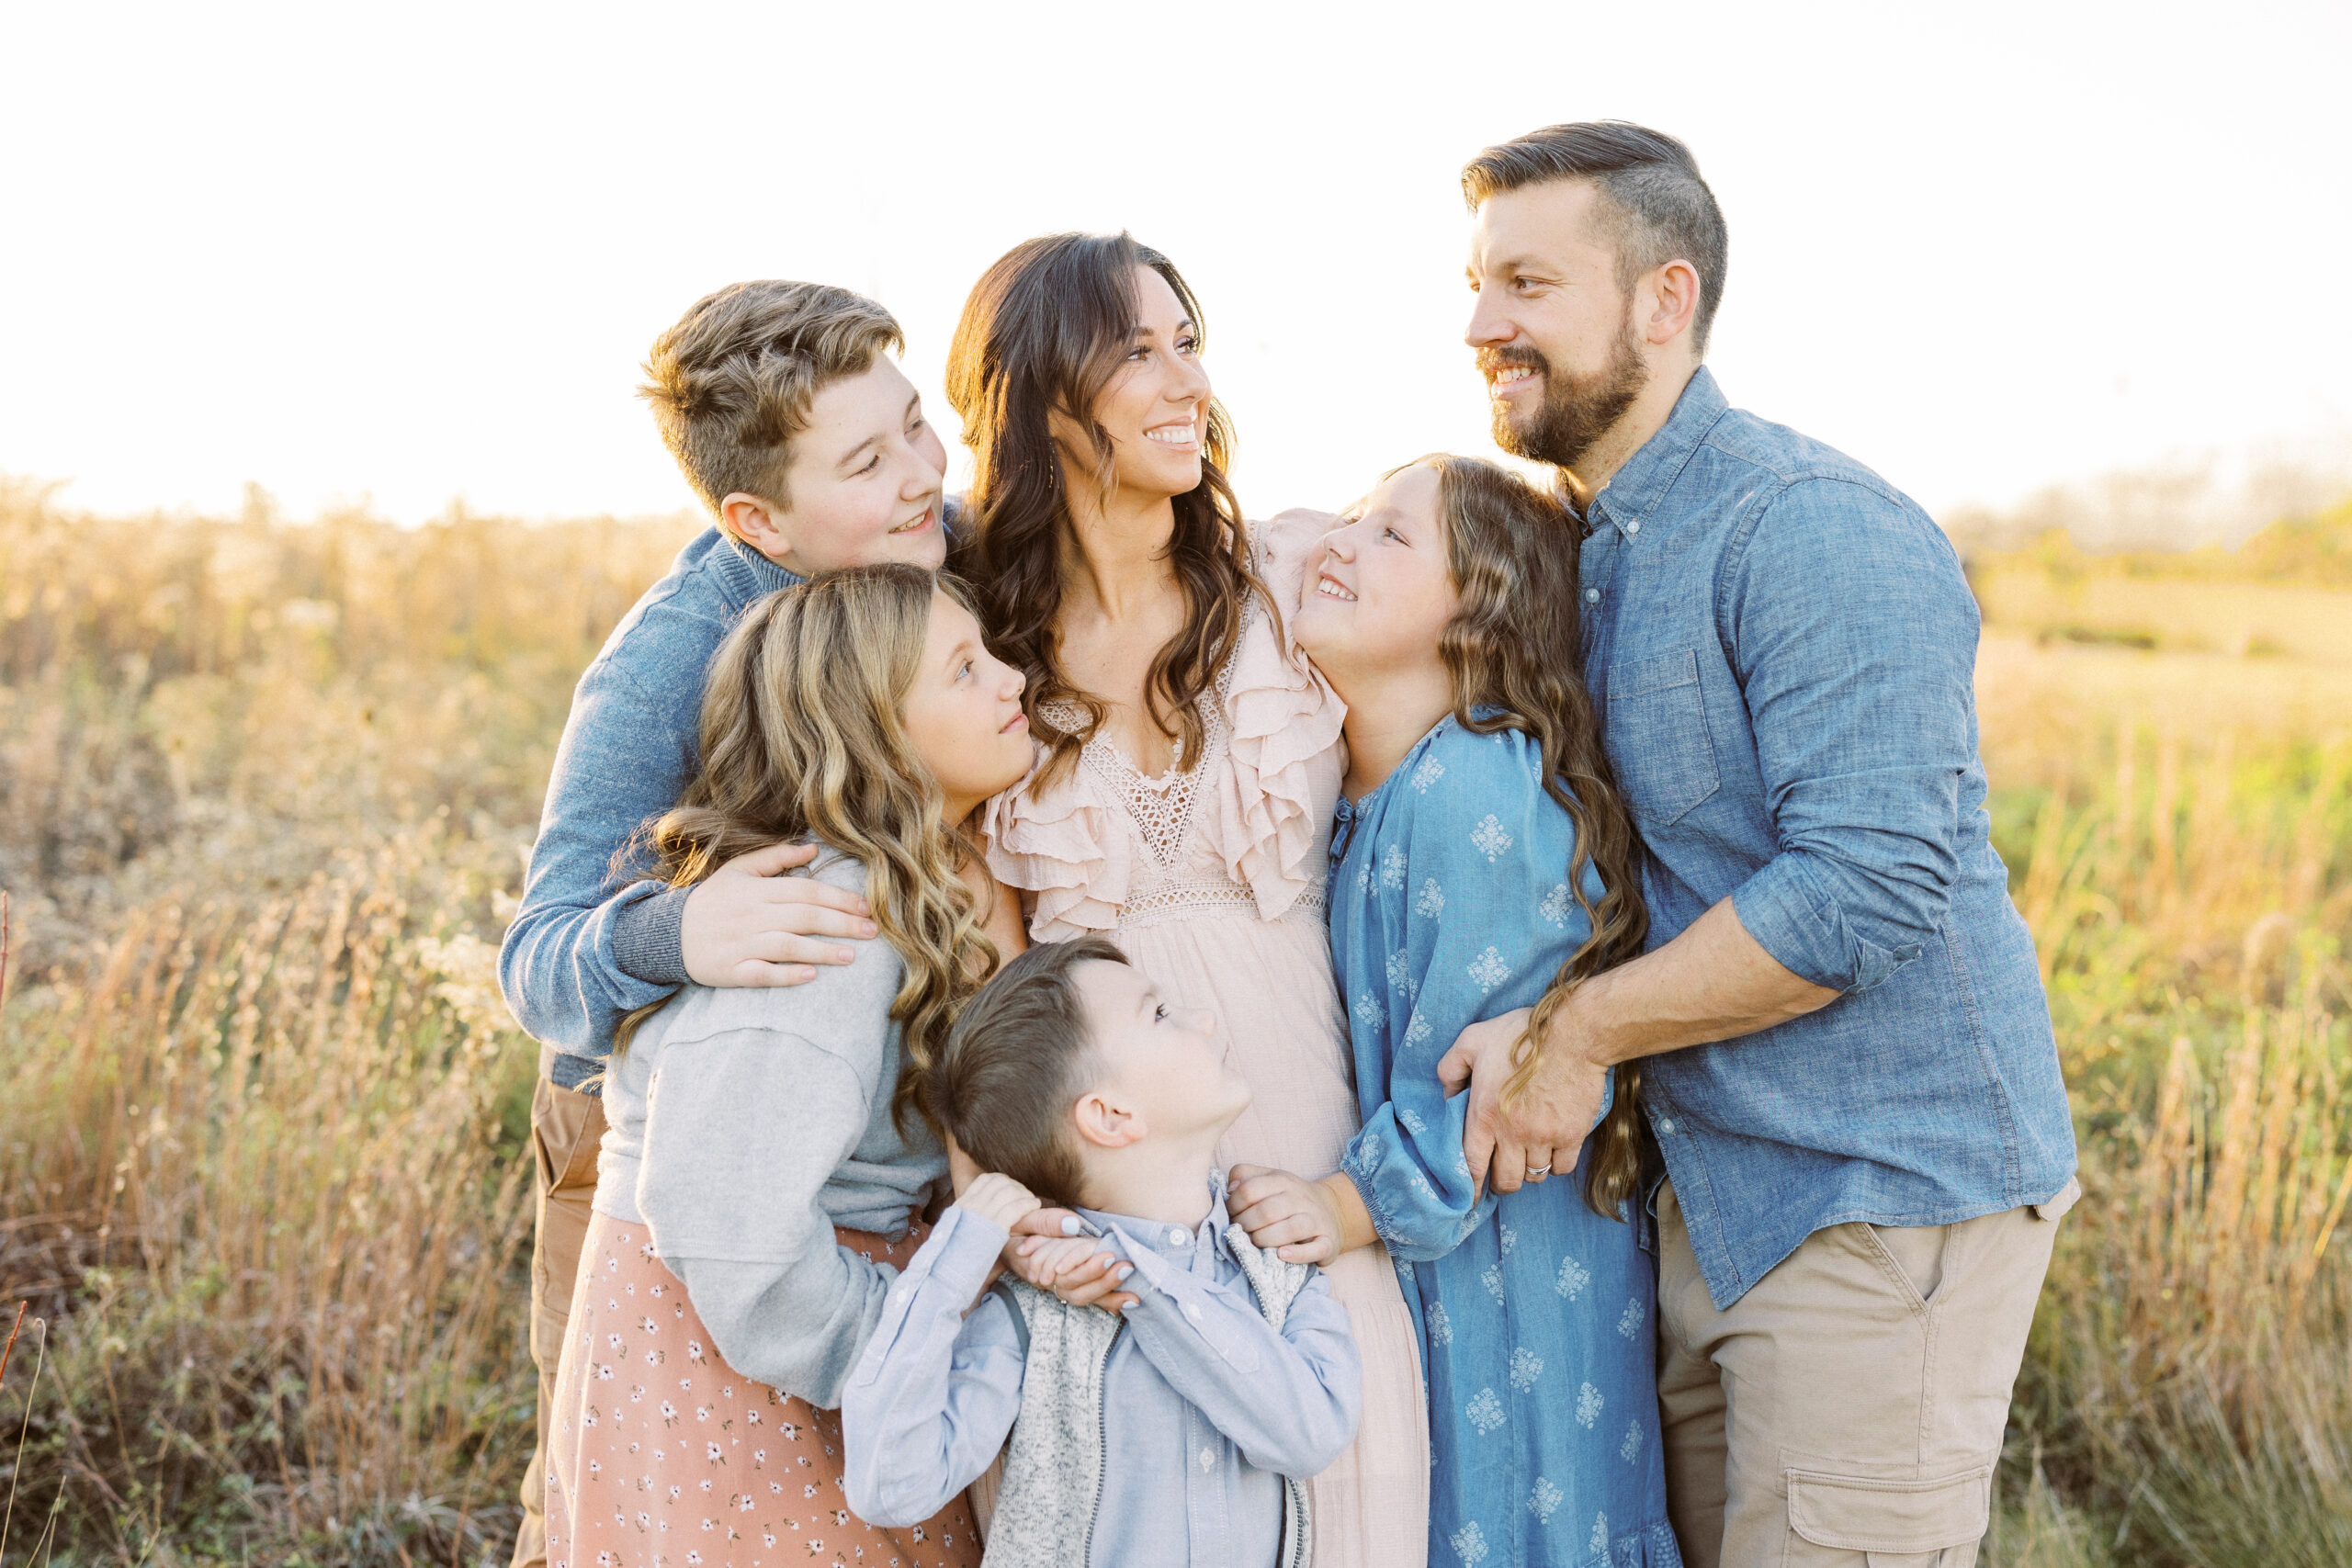 What to expect during your family photoshoot